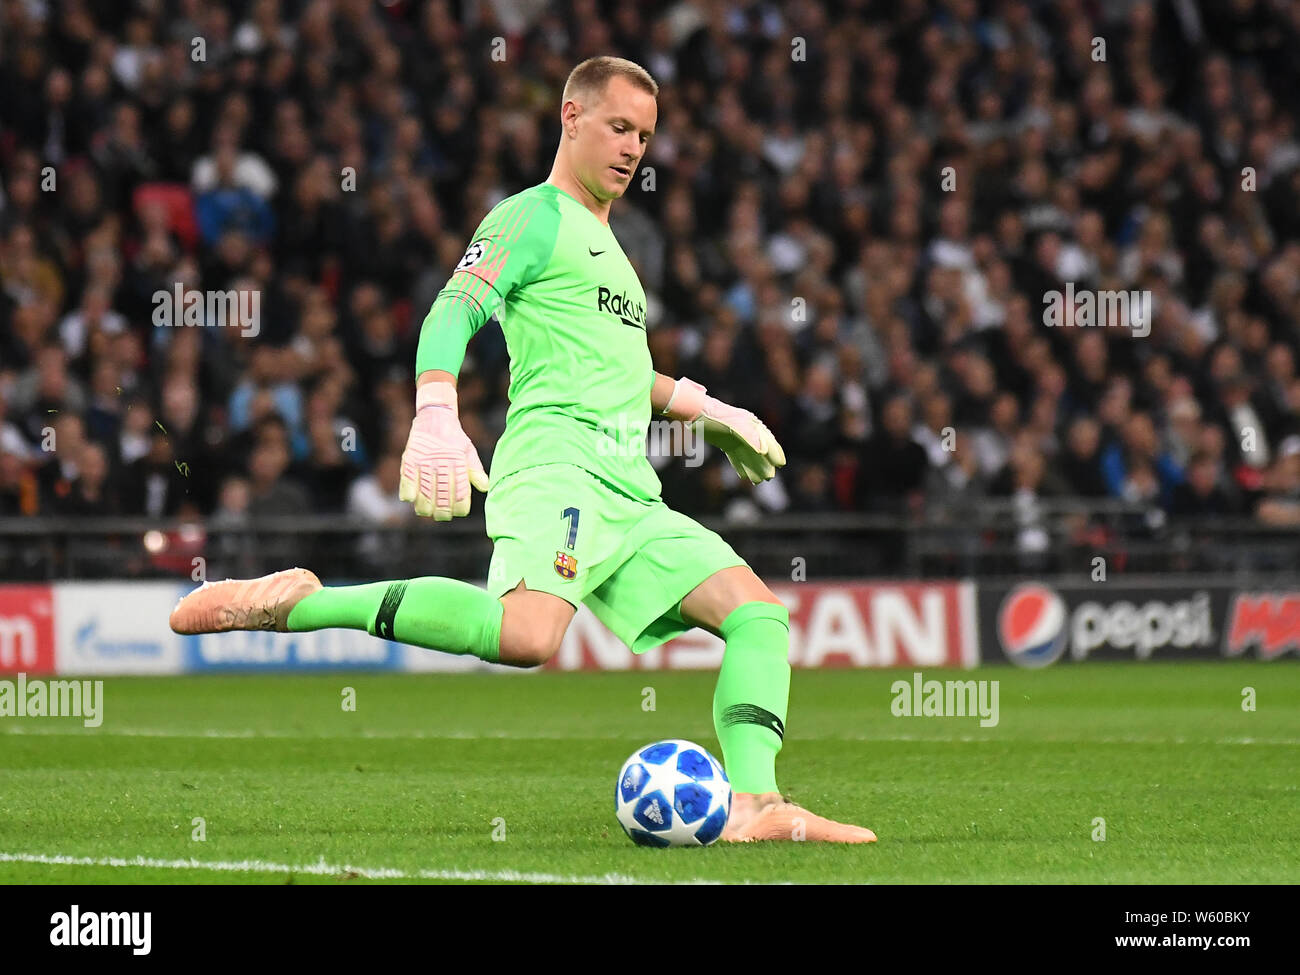 LONDON, ENGLAND - OCTOBER 3, 2018: Marc-Andre ter Stegen of Barcelona  pictured during the 2018/19 UEFA Champions League Group B game between  Tottenham Hotspur (England) and FC Barcelona (Spain) at Wembley Stadium